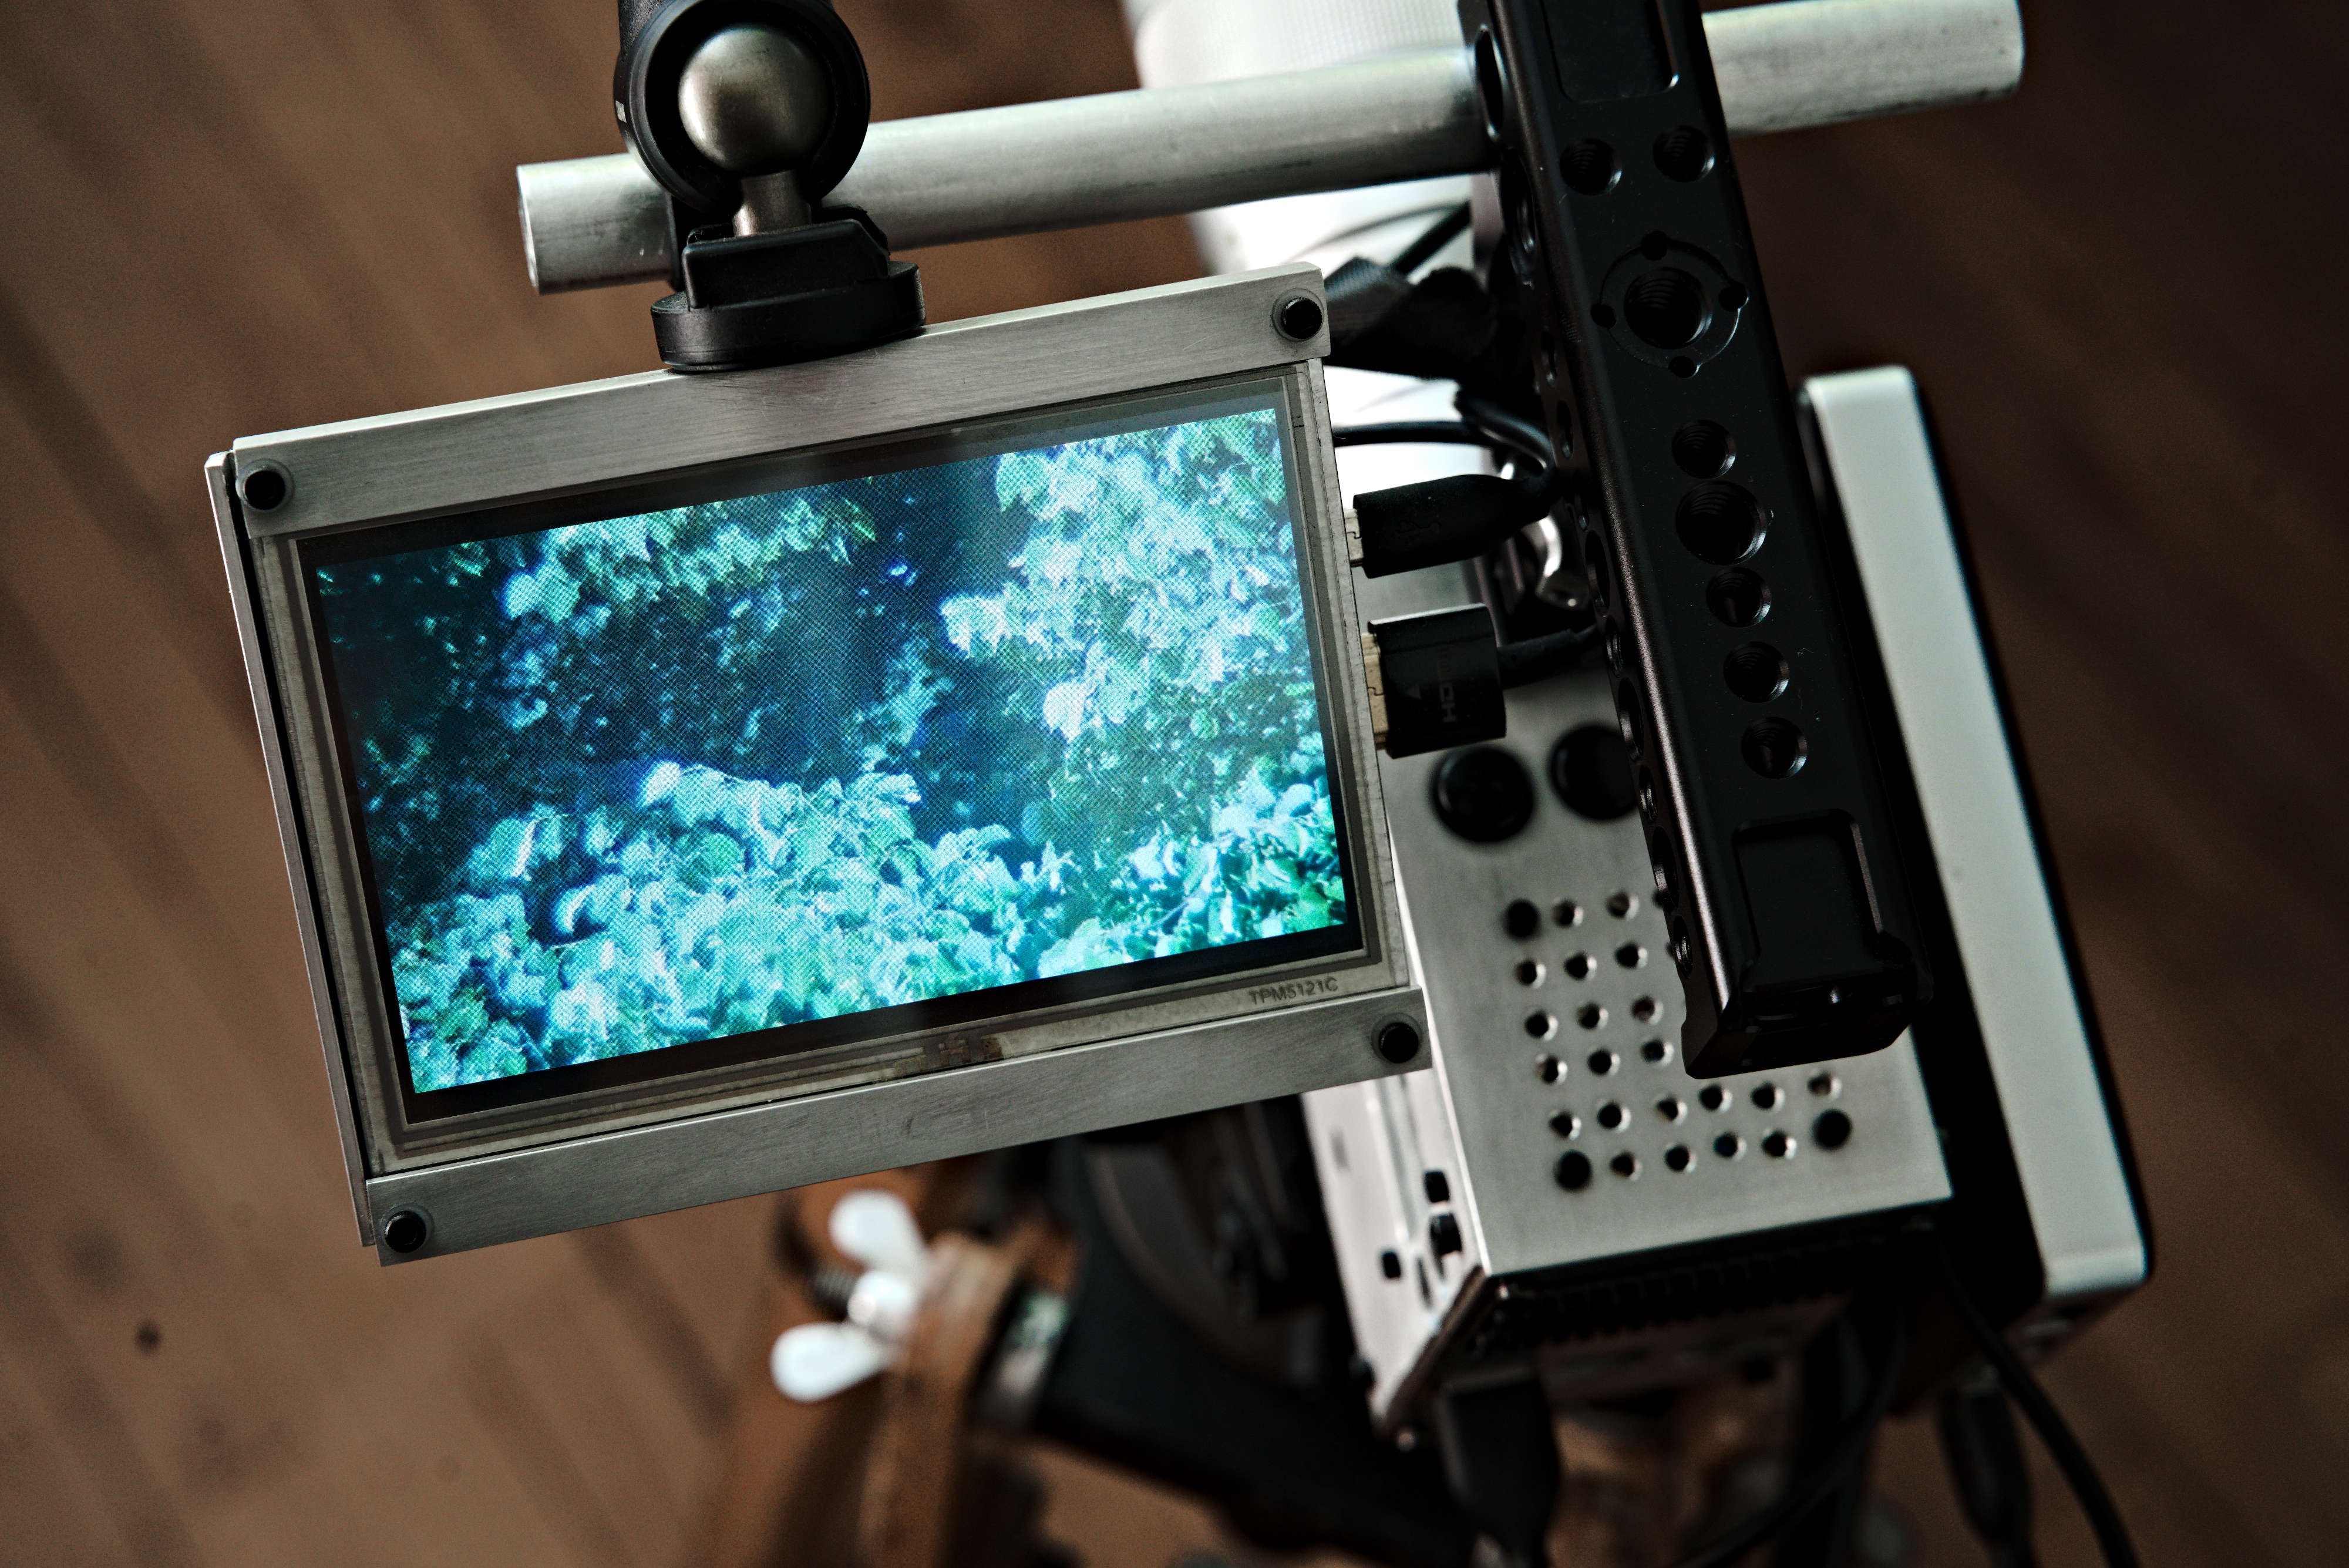 camera topview with screen showing trees